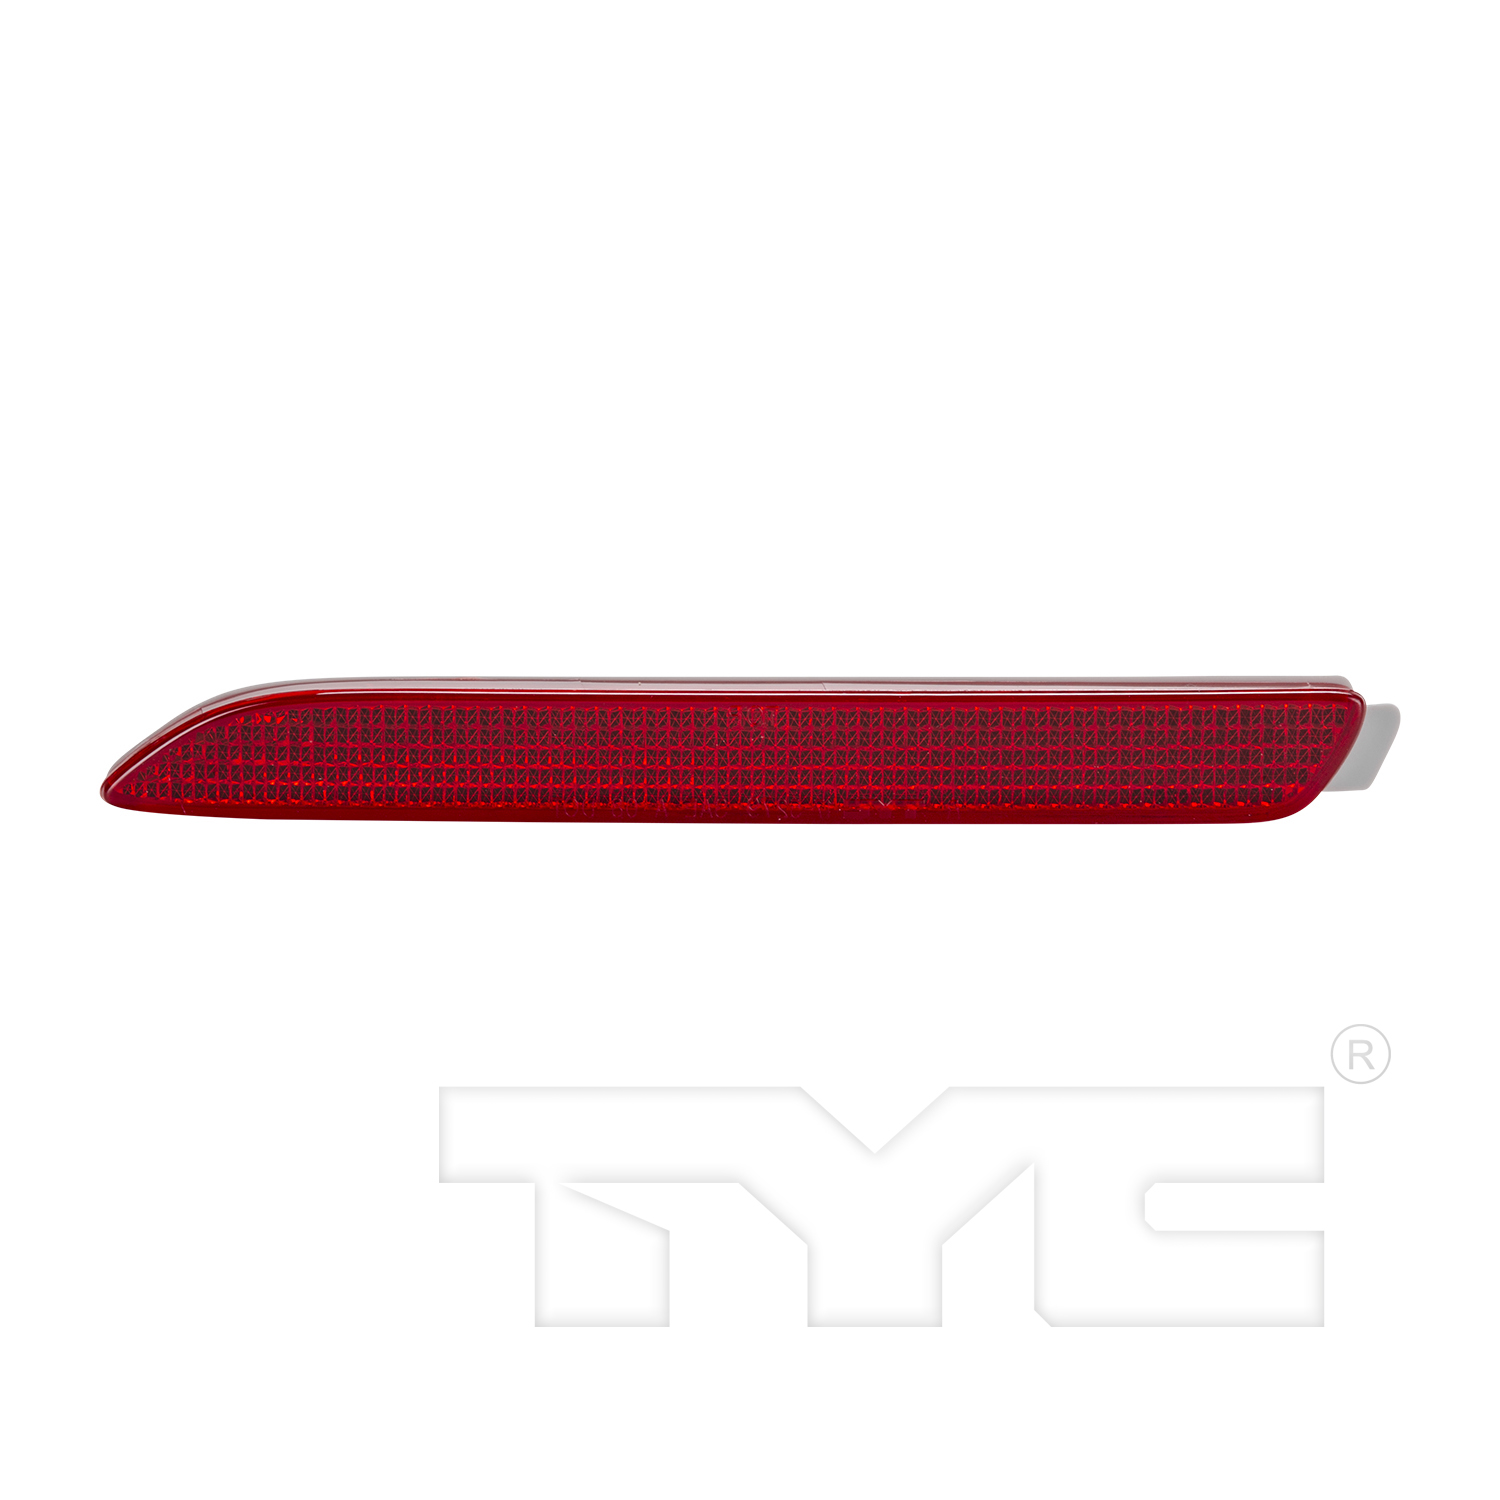 Aftermarket LAMPS for TOYOTA - VENZA, VENZA,09-16,LT Rear reflector